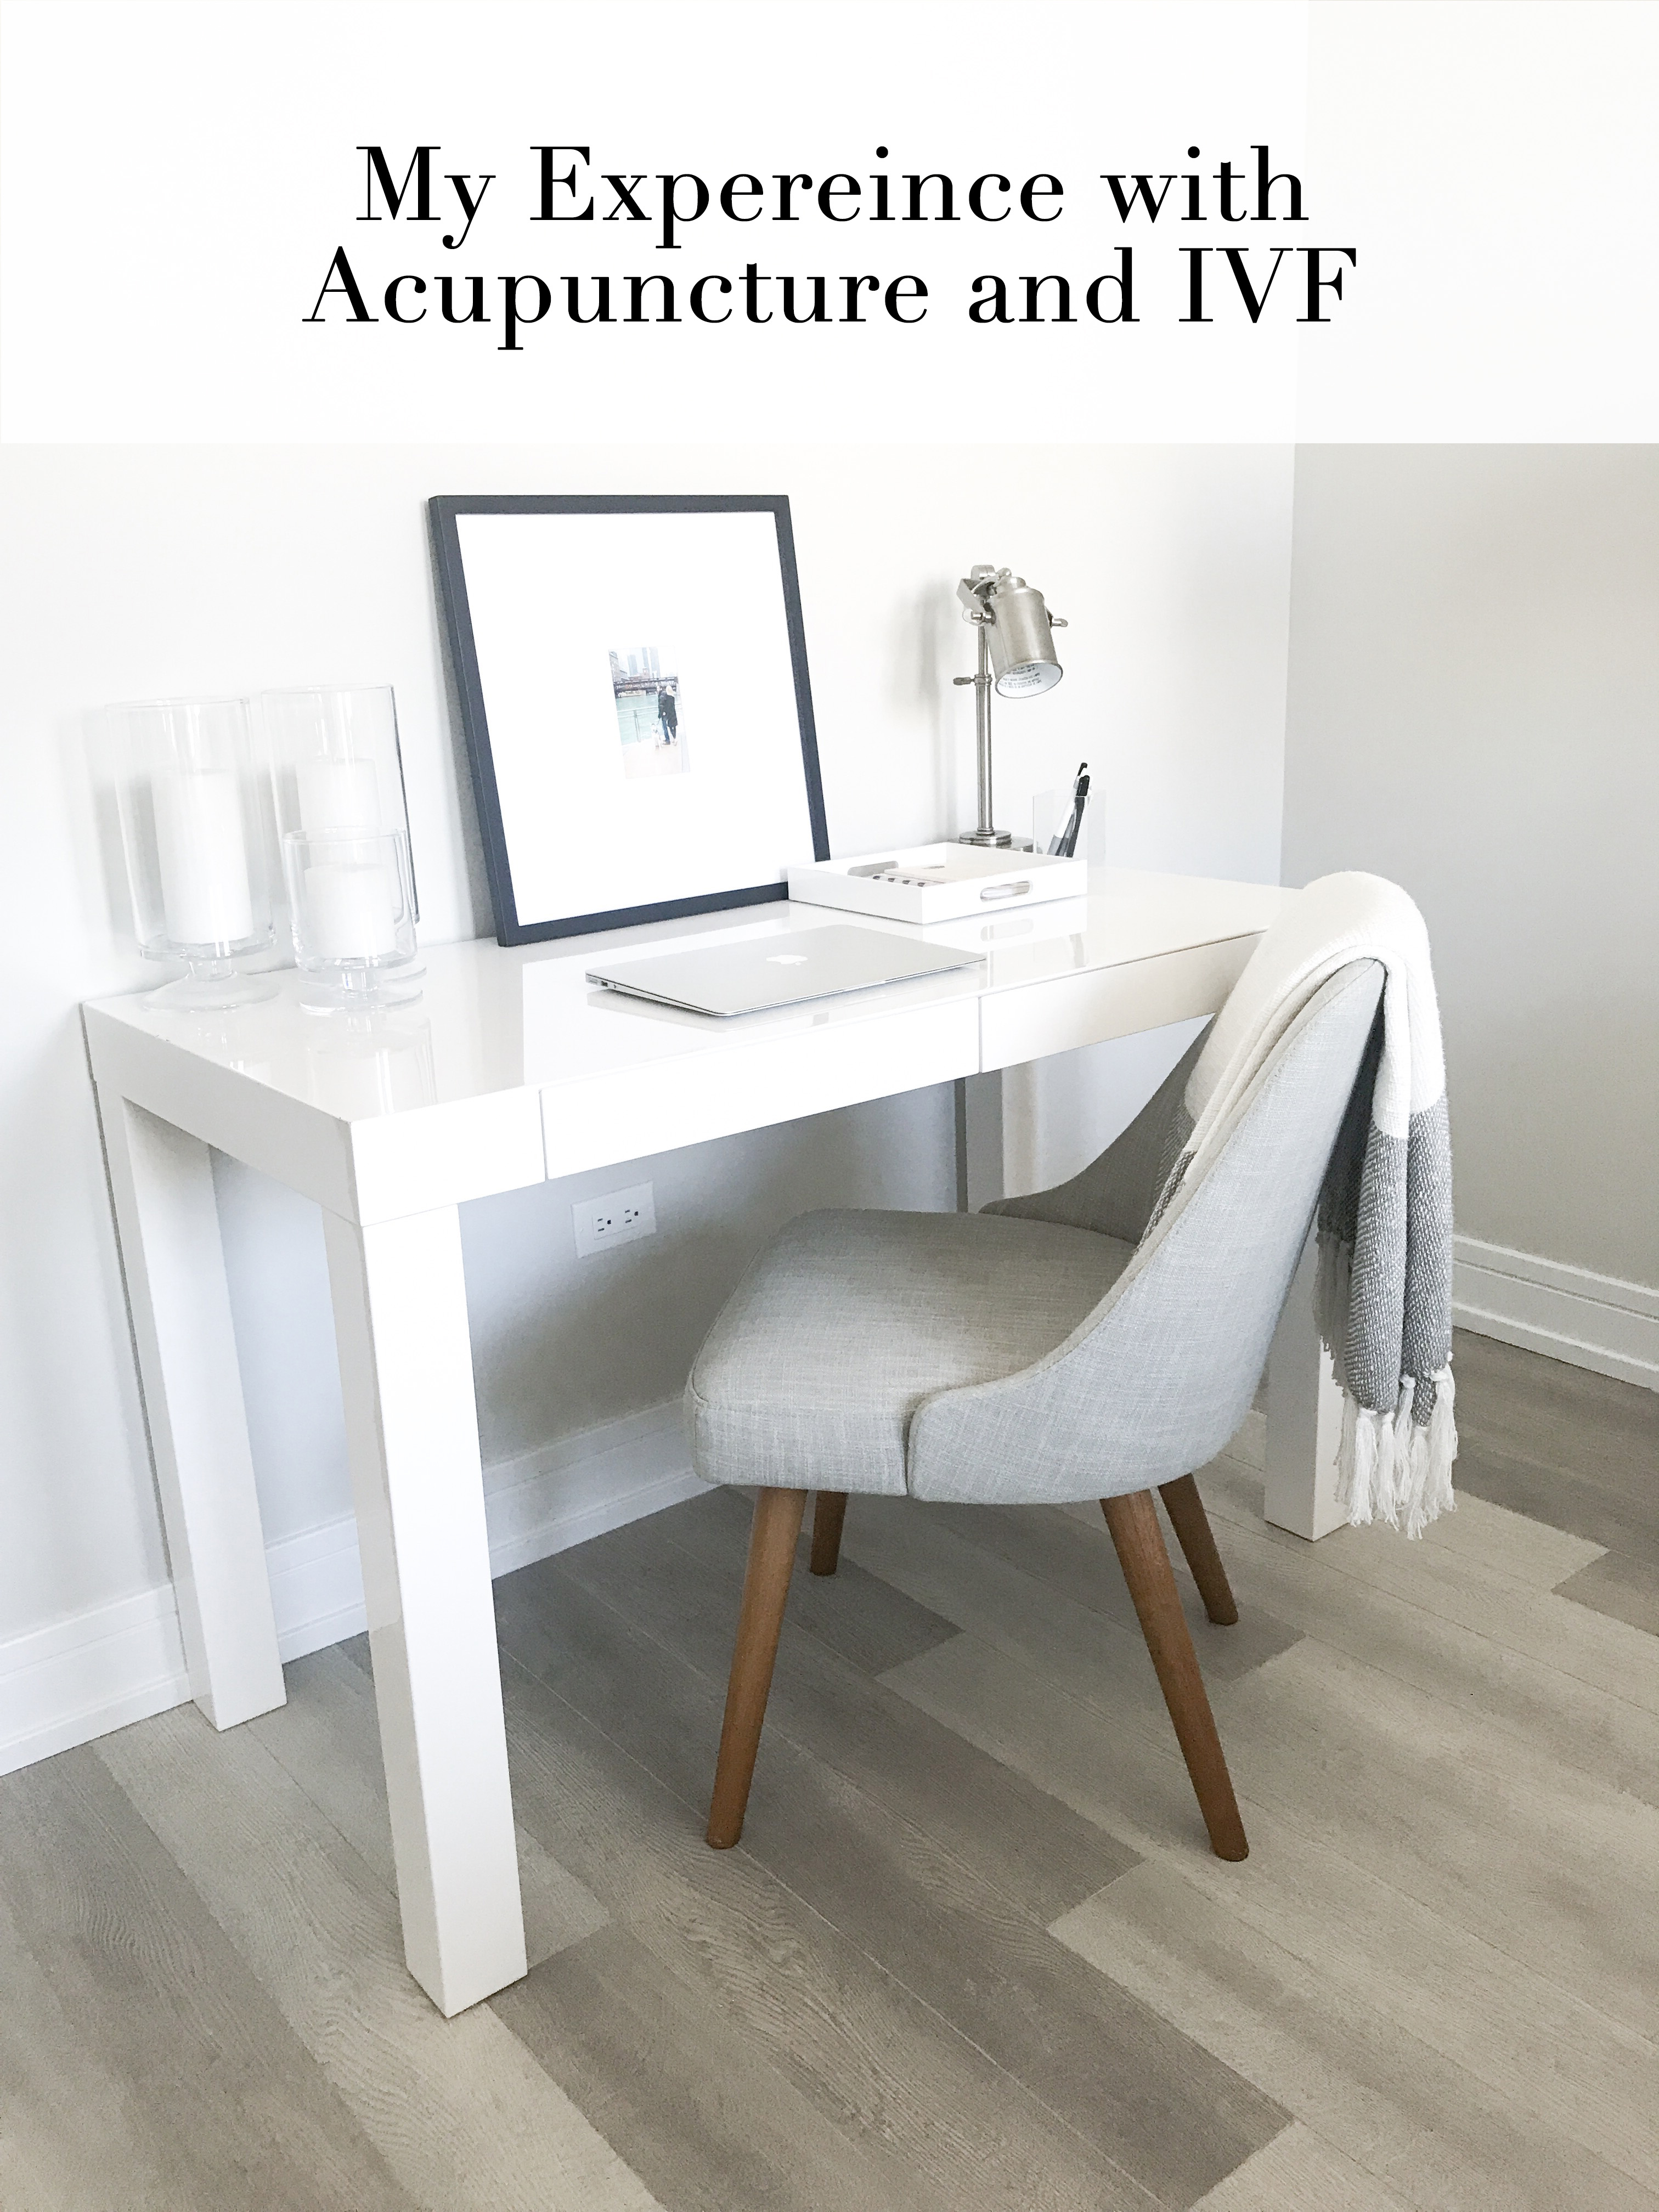 my experience with acupuncture and IVF